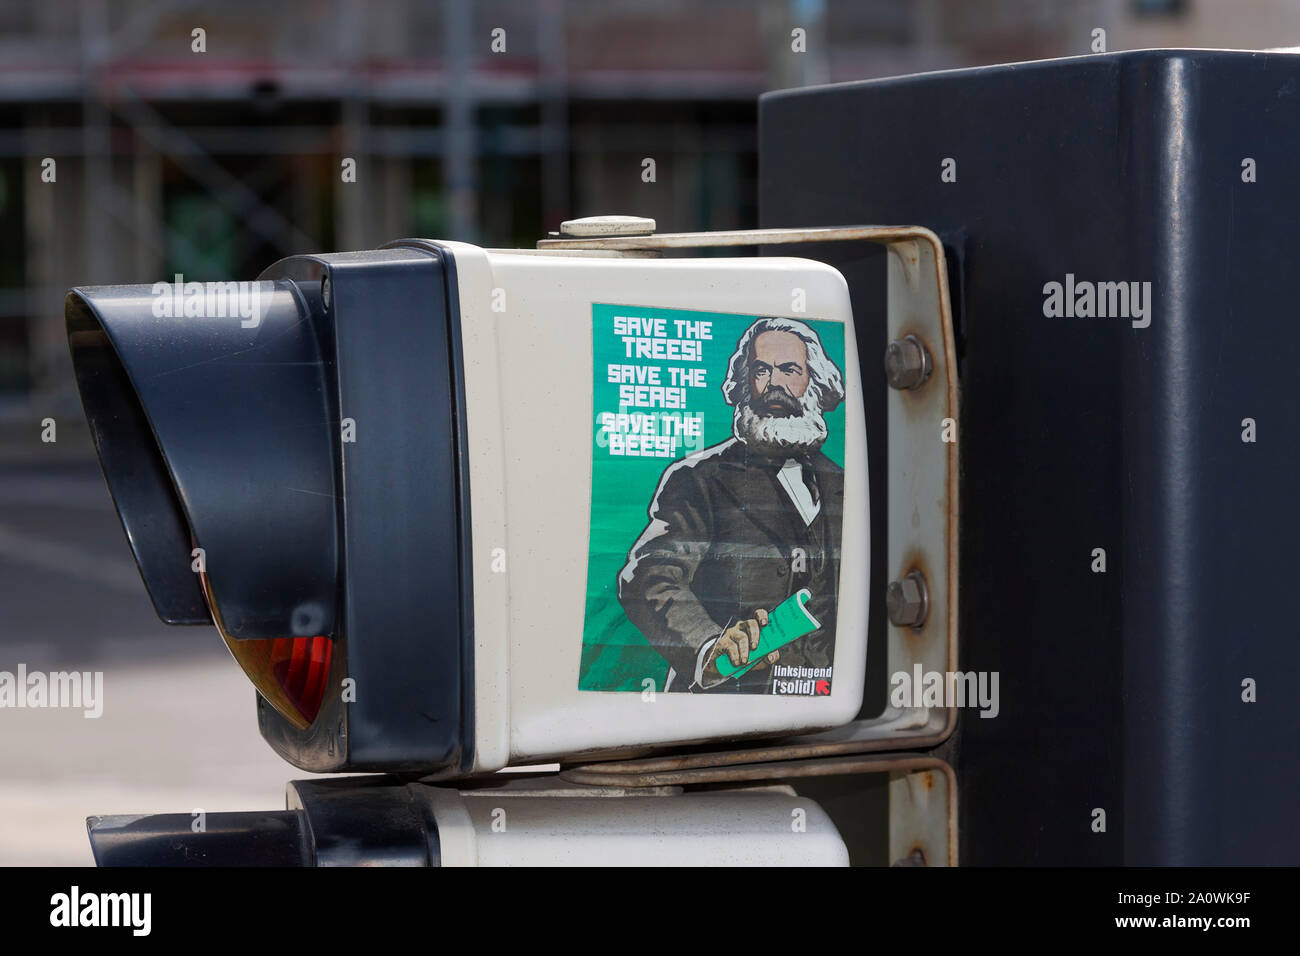 Sticker, Karl Marx, save the trees, save the seas, save the bees, Linkskugen Stock Photo